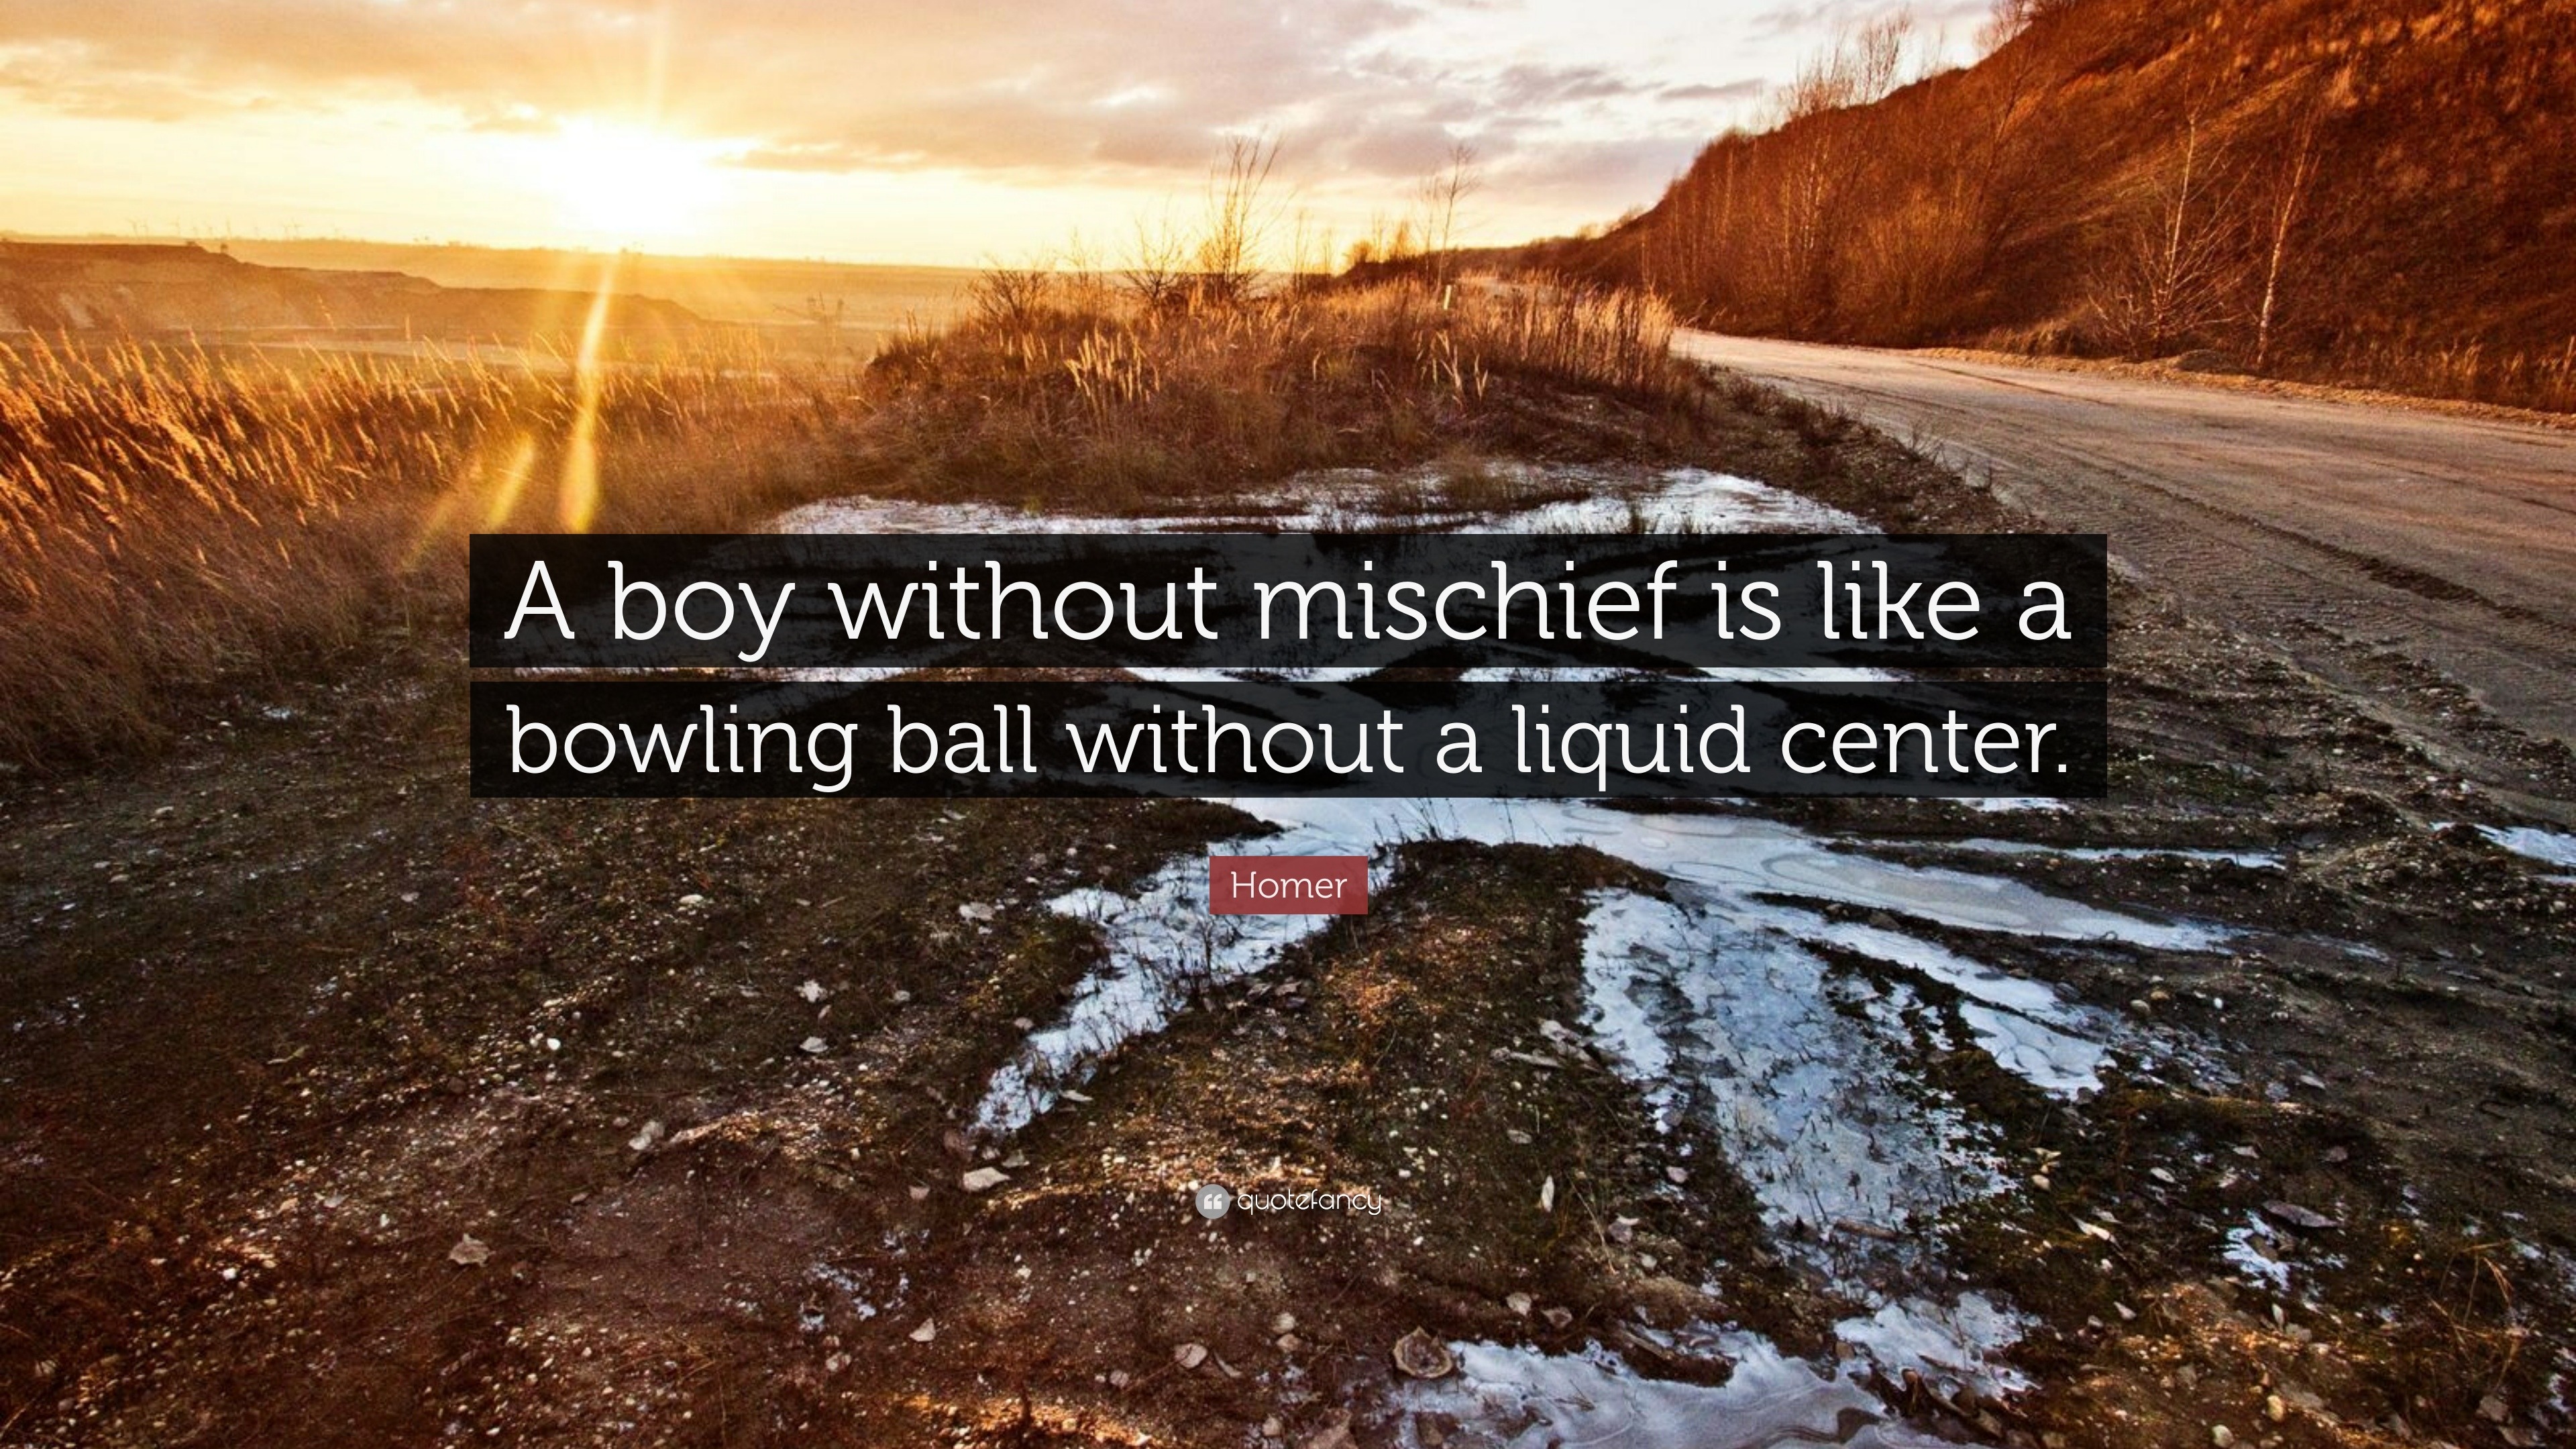 Homer Quote: “A boy without mischief is like a bowling ball